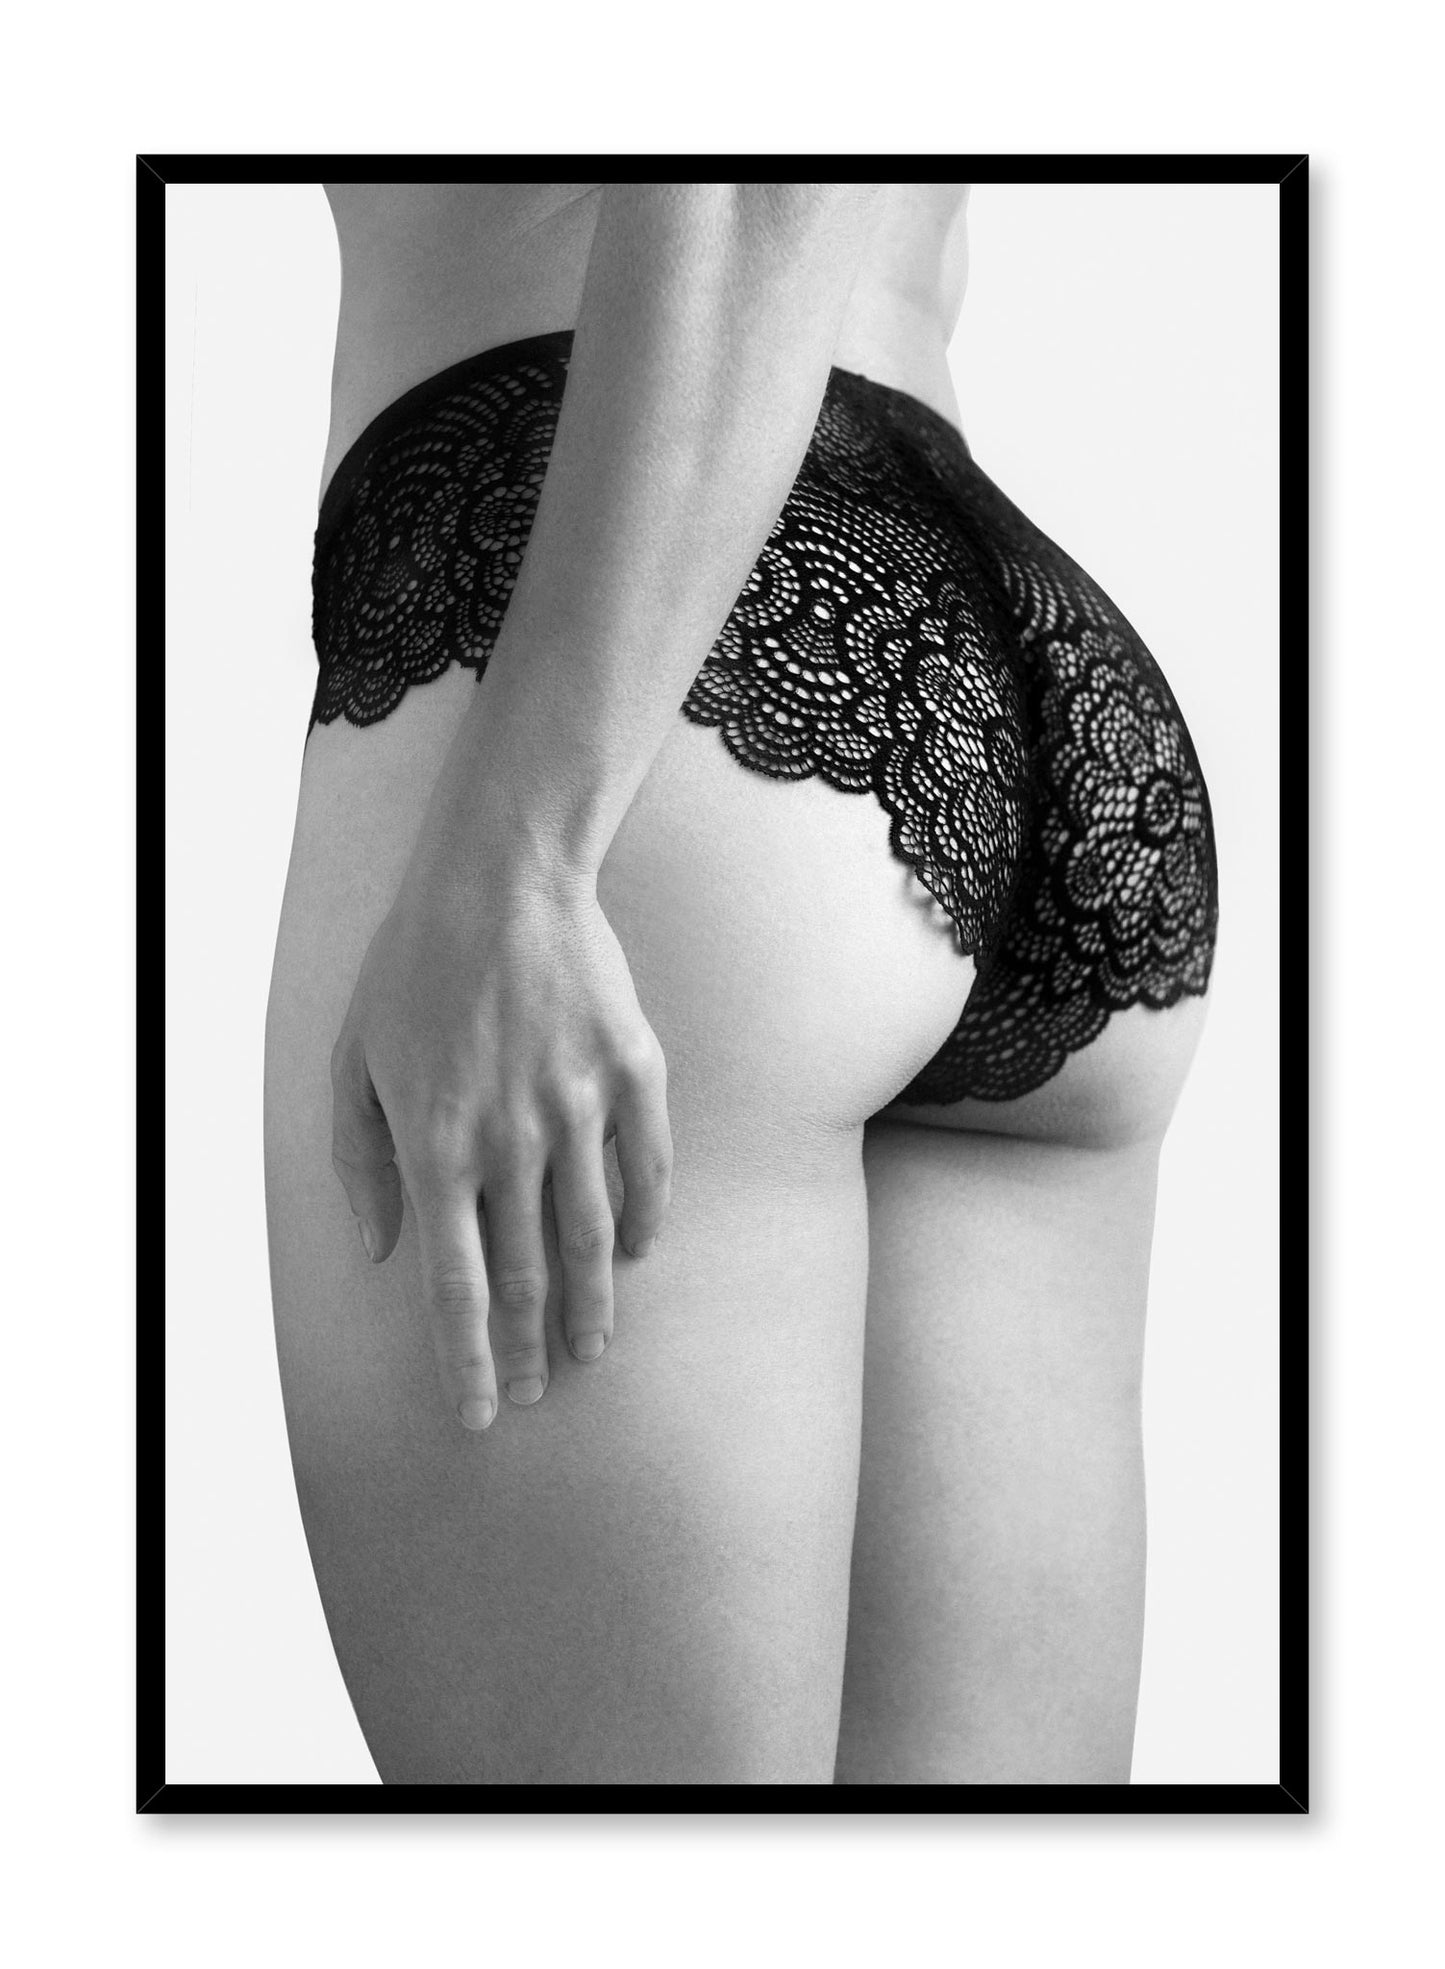 Black and white fashion photography poster by Opposite Wall with woman posterior in lacy underwear